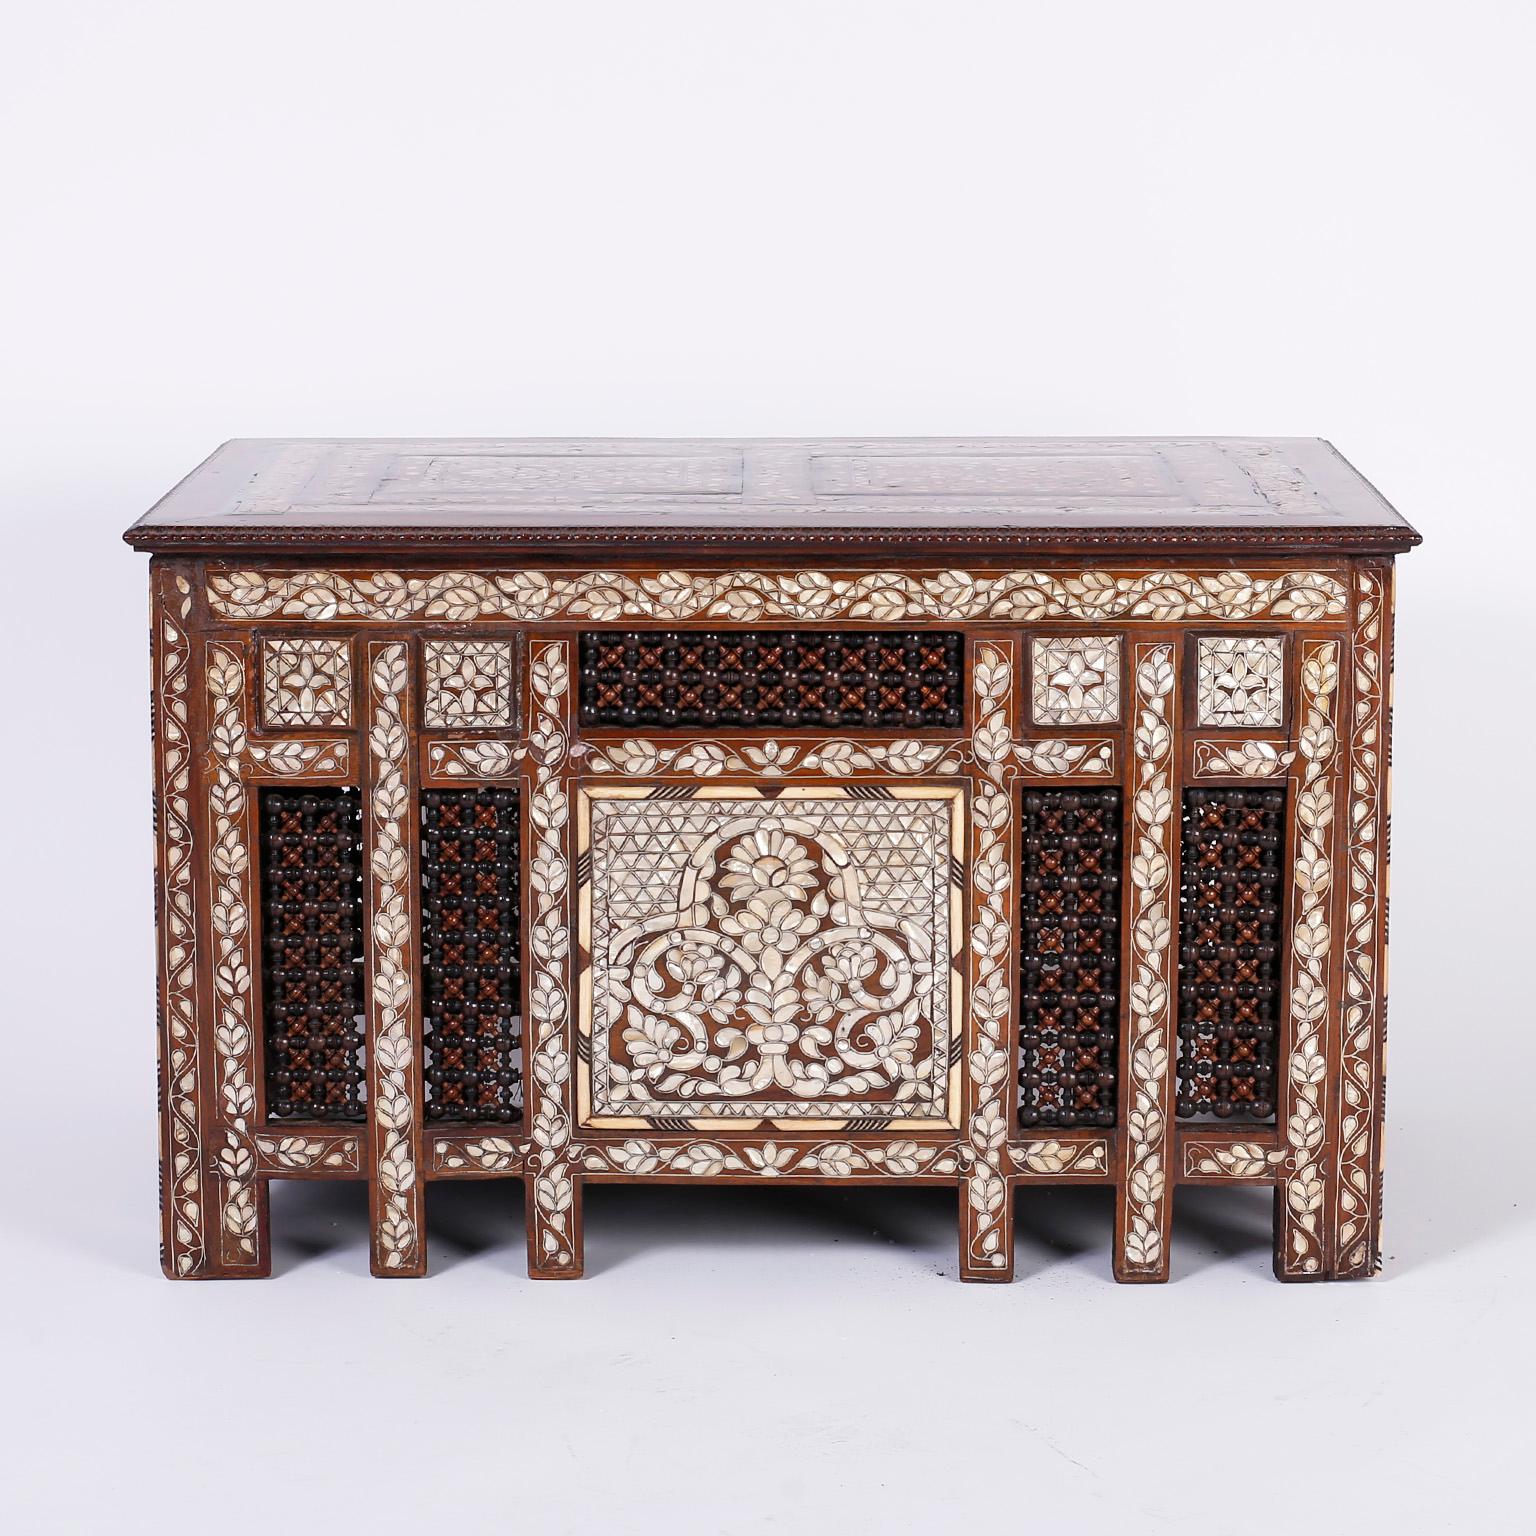 Refined antique Anglo-Indian or Syrian coffee or occasional table with a rectangular top inlaid with mother of pearl in a symbolic floral design. The base is decorated on four sides with elaborate mother of pearl inlays, stick and ball panels and